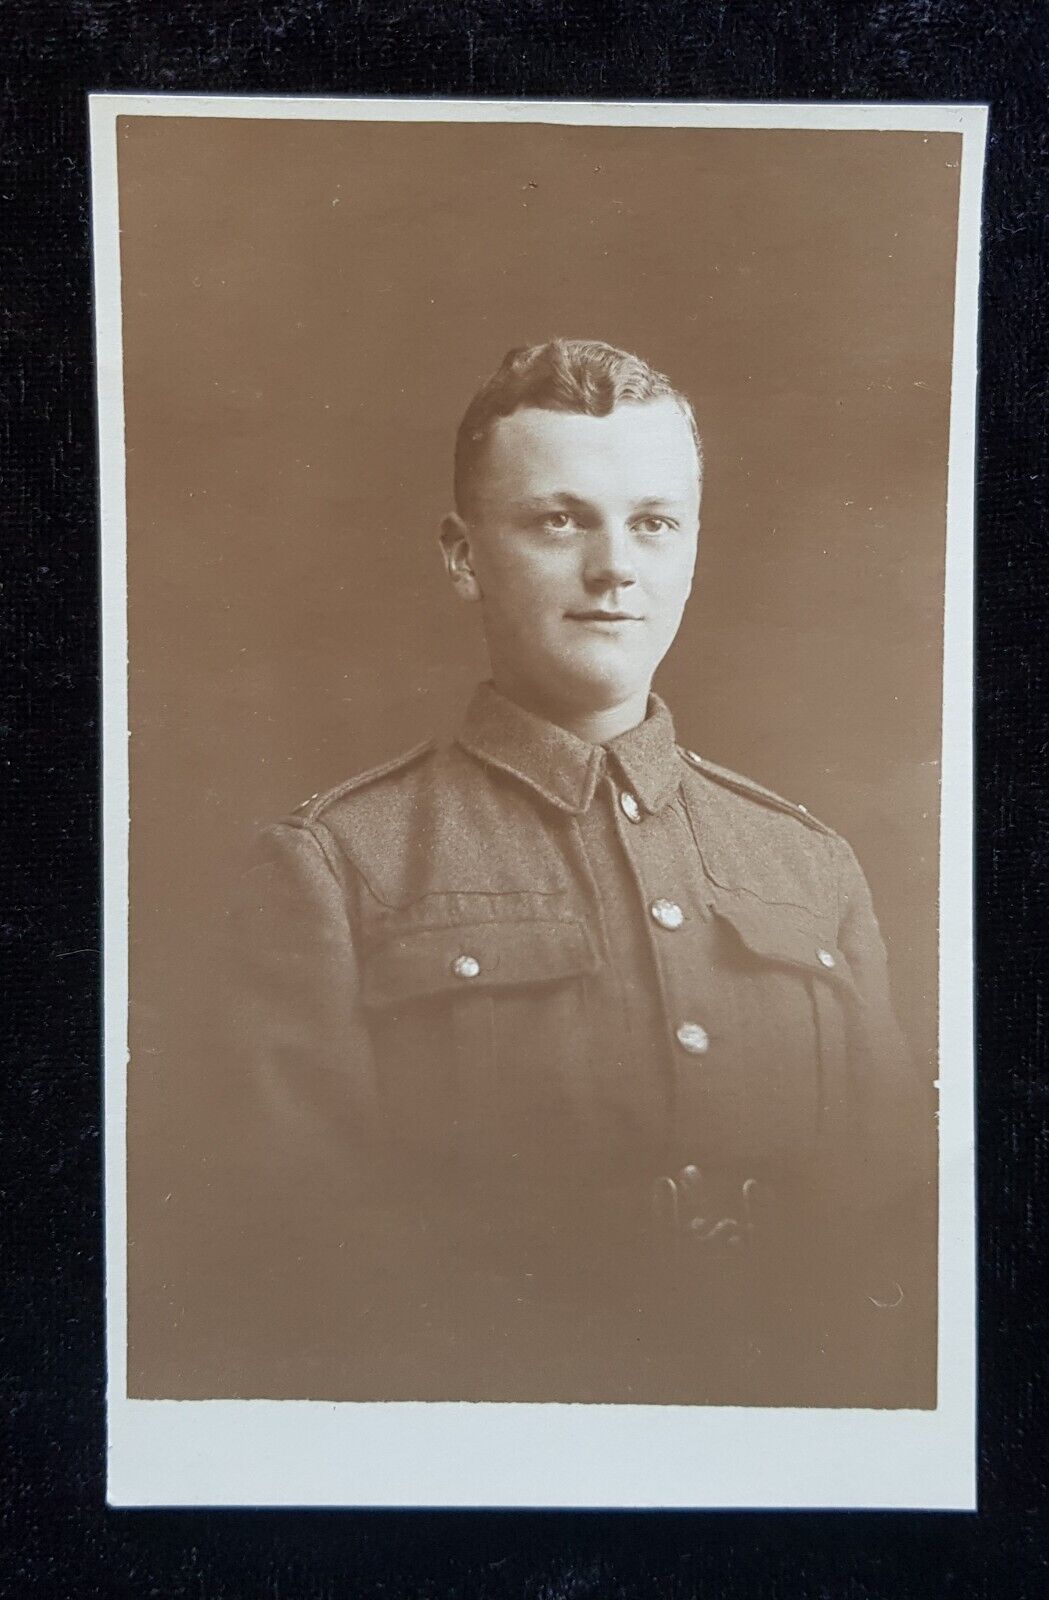 c1917 RPPC Portrait of Army Soldier - Social History